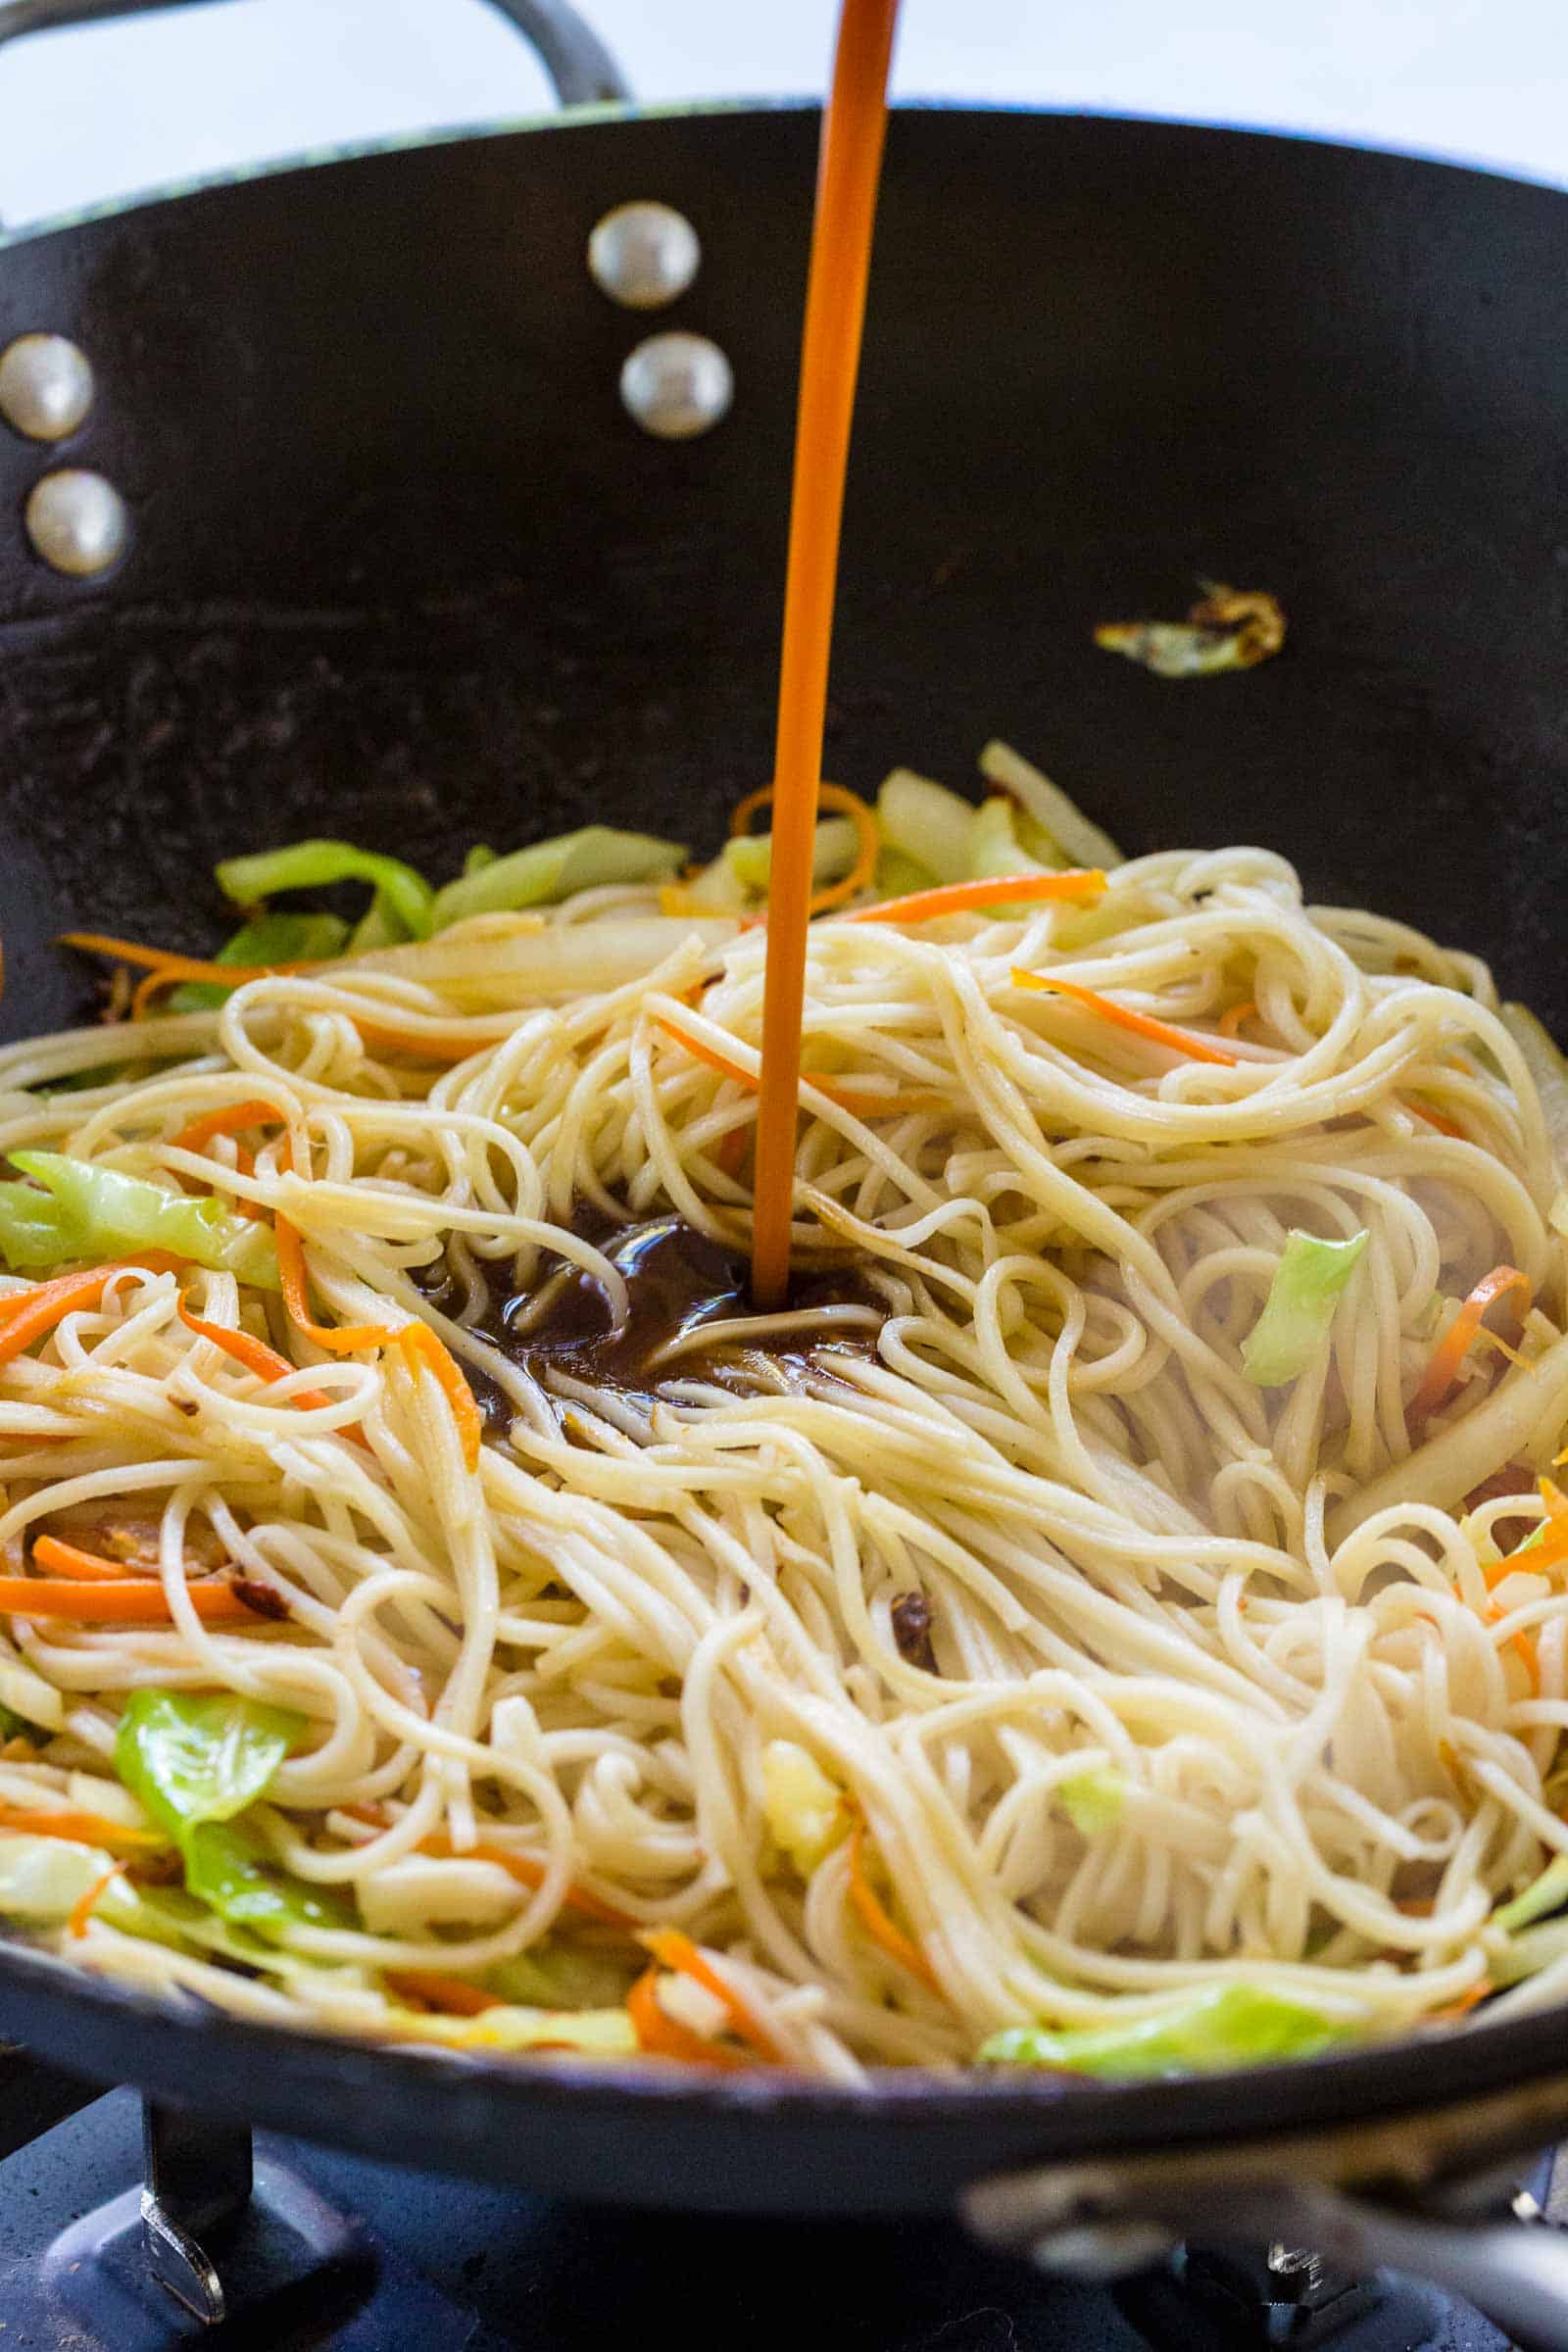 Pouring stir fry sauce onto noodles in a wok